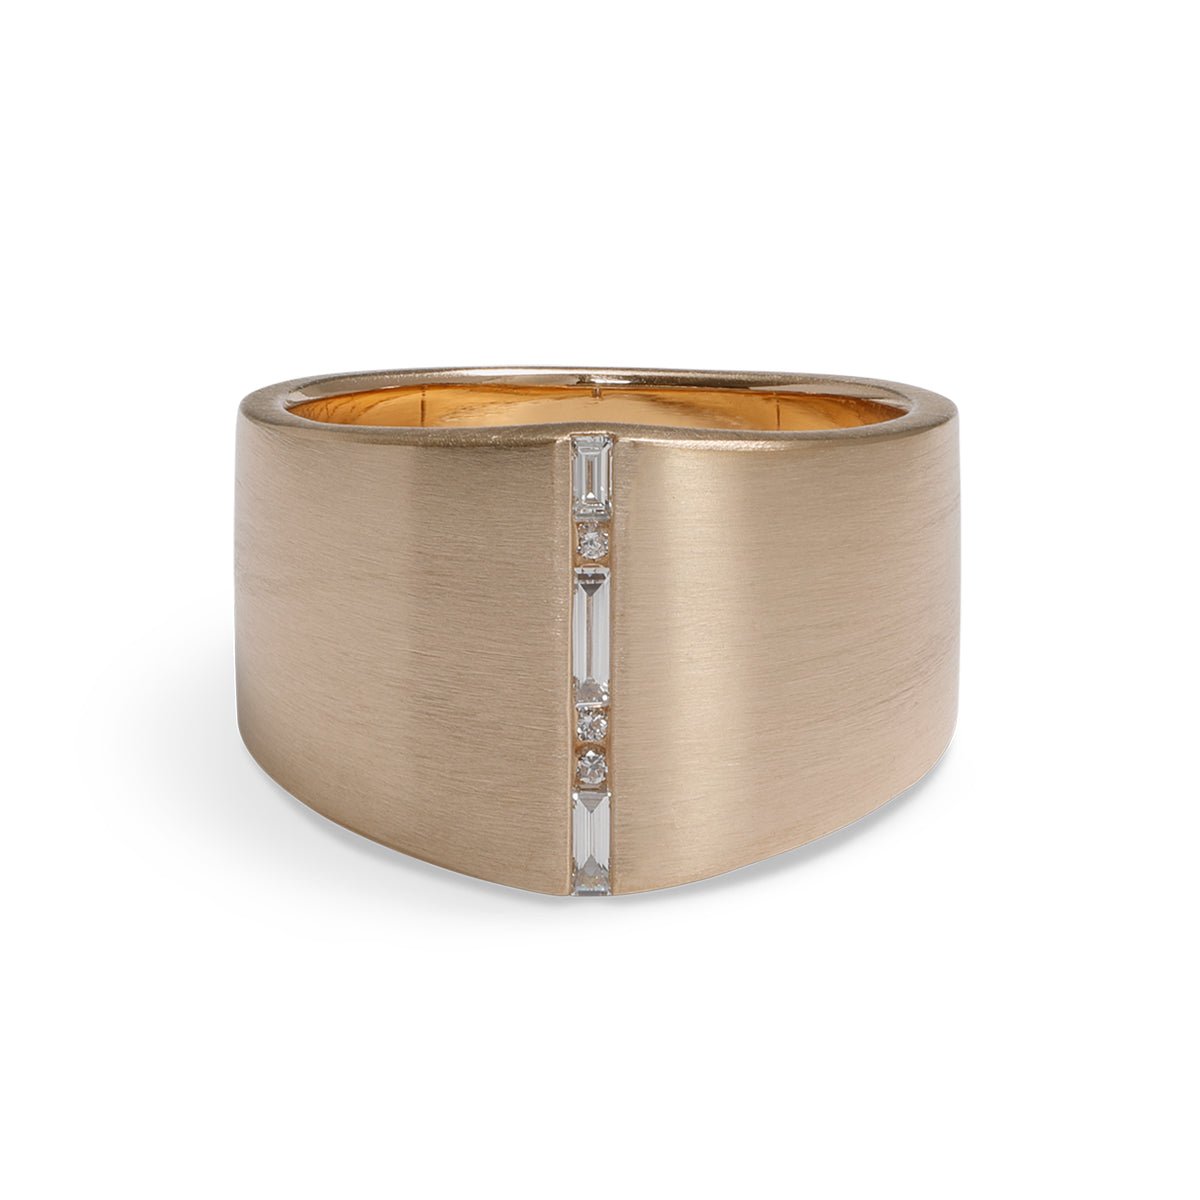 Decus 14K gold band, with lab-grown diamond accents. Designed in Portland, Oregon.